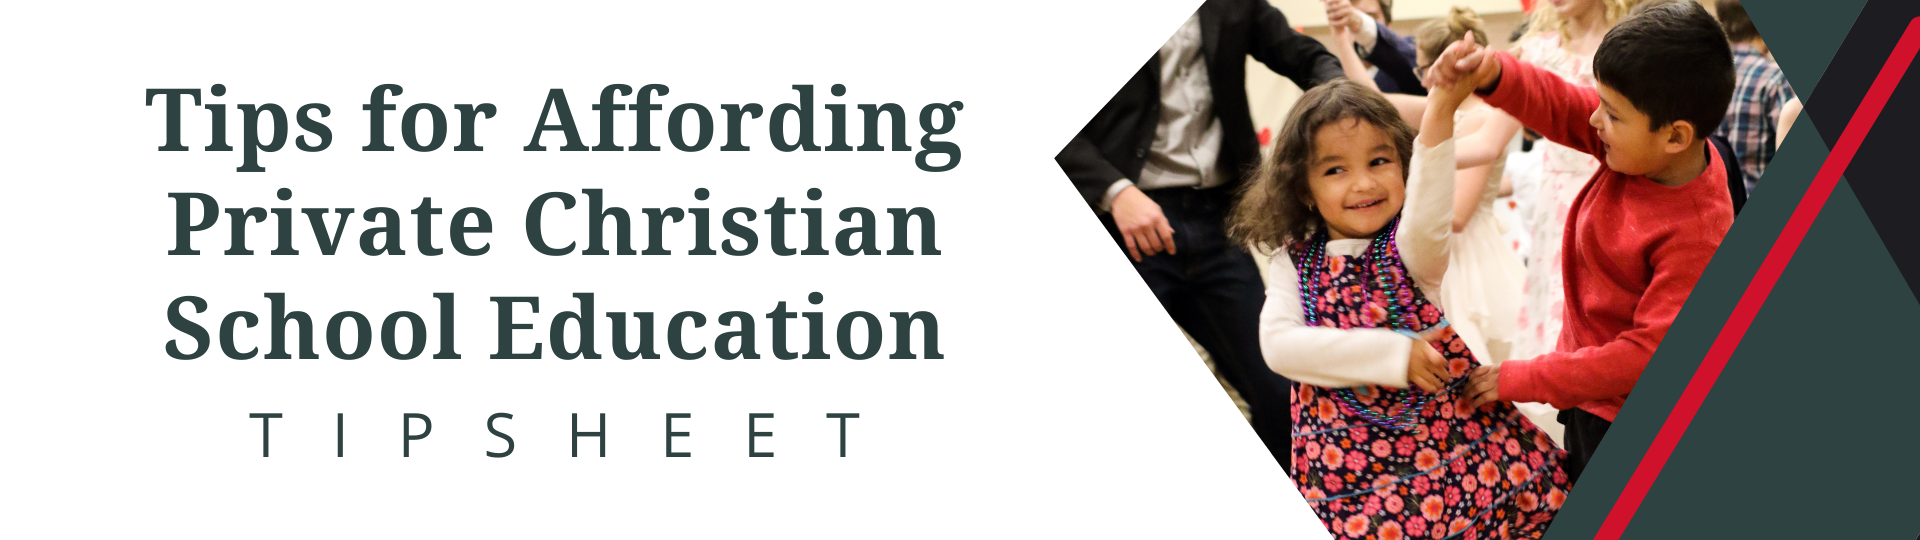 Tips for Affording Private Christian School Education